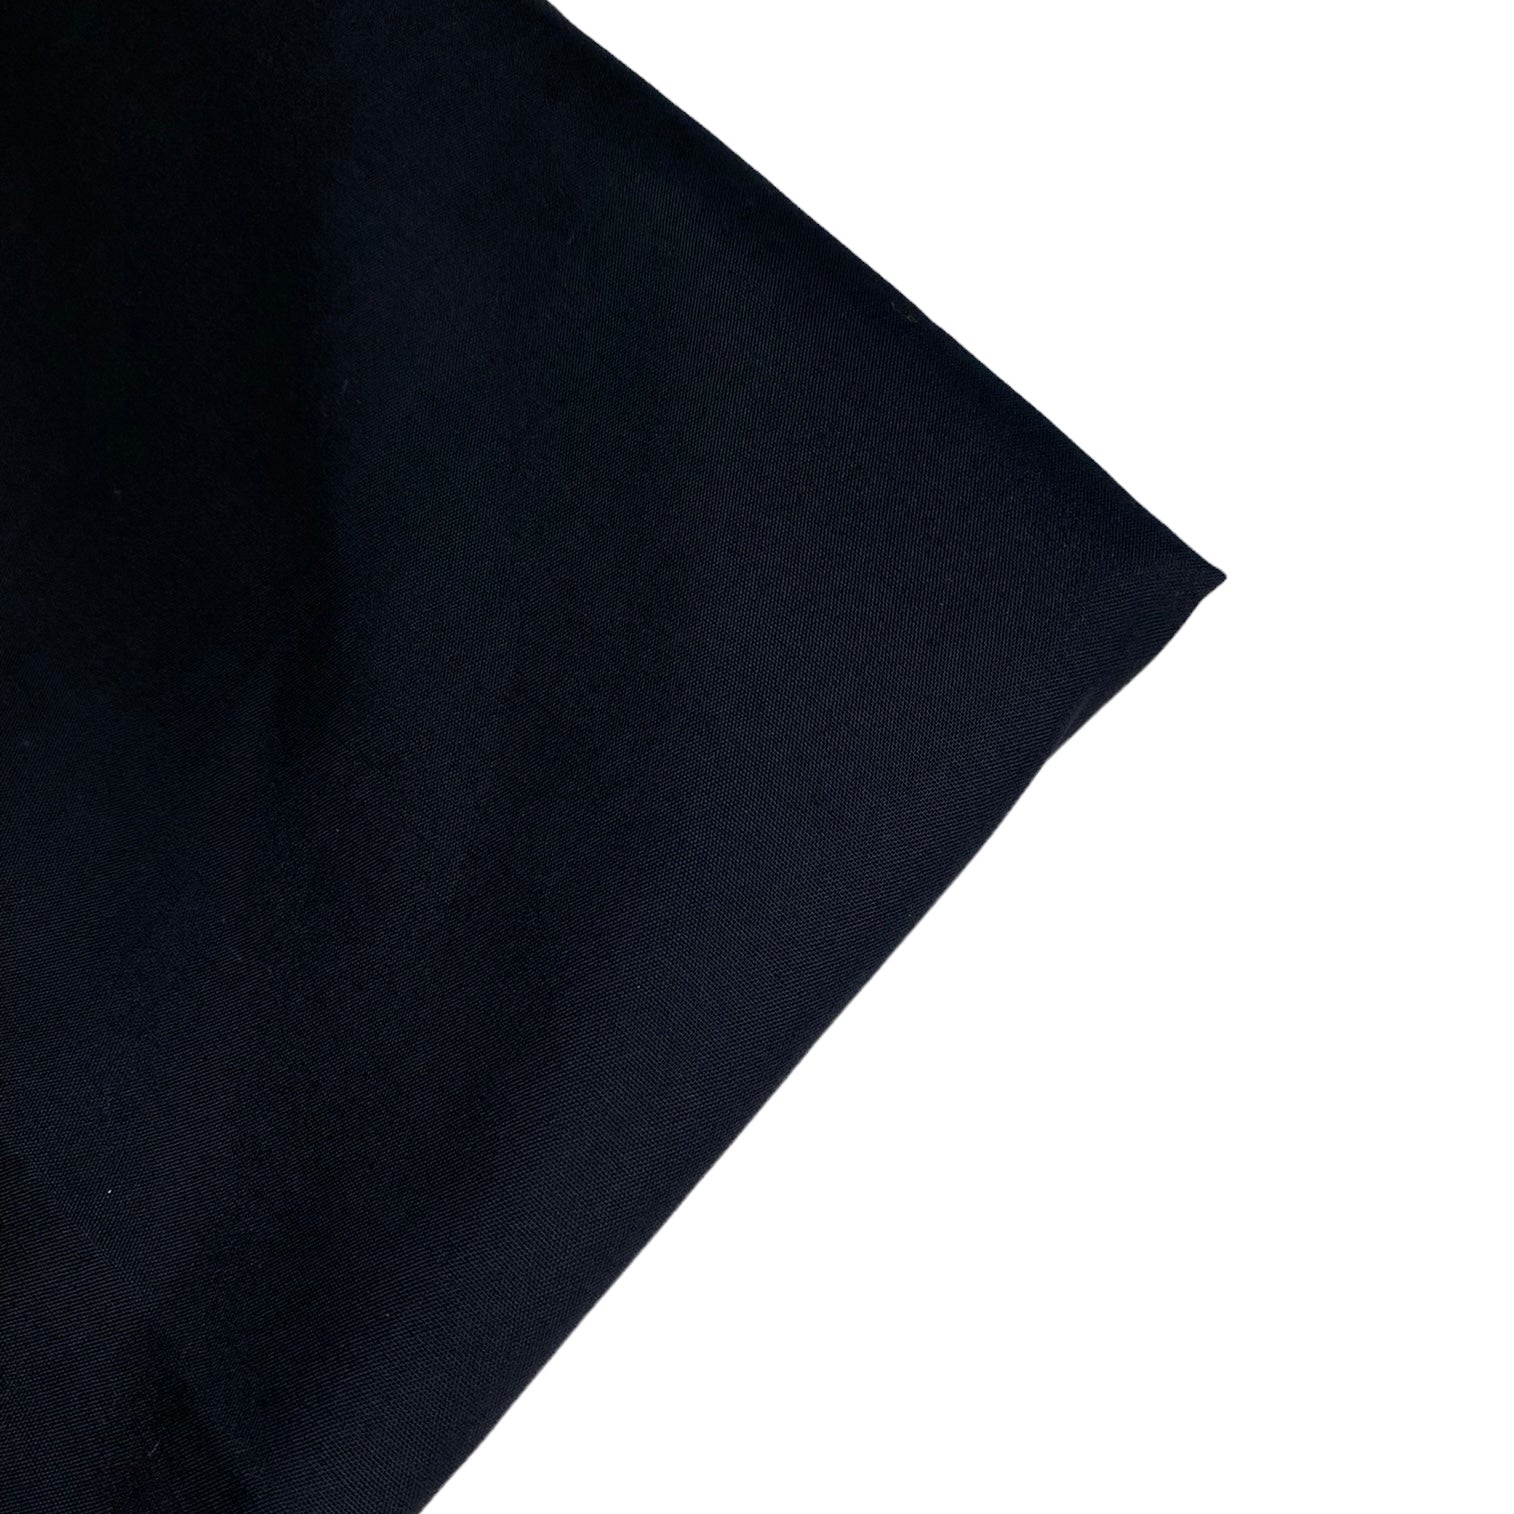 Polyester/Cotton Broadcloth - 60” - Black